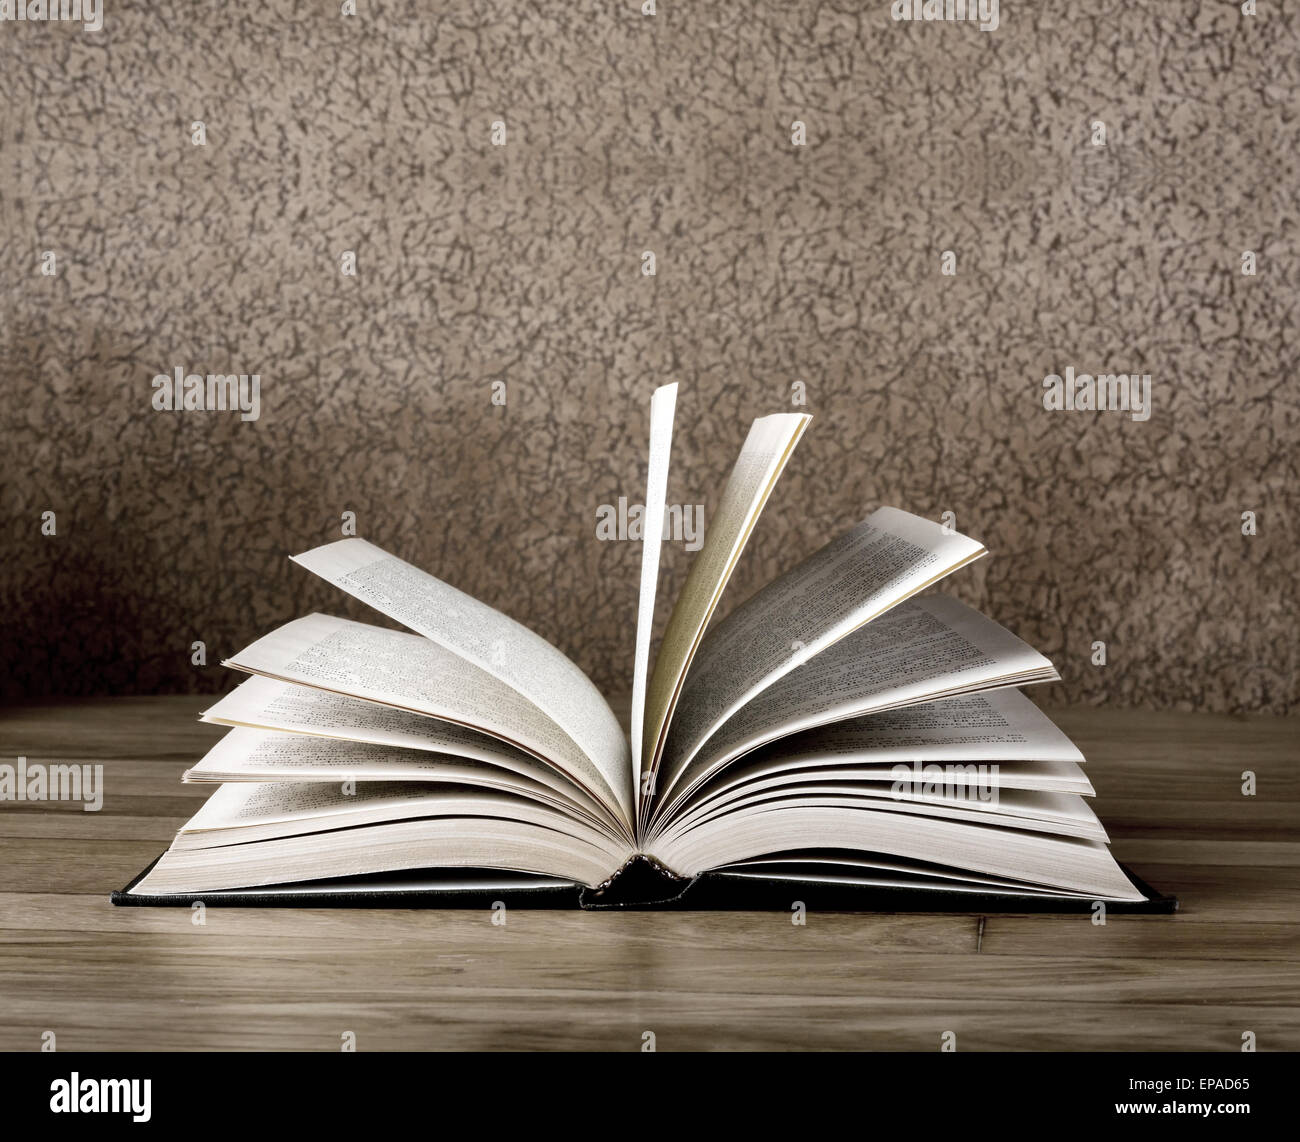 Old open book on grunge wooden table Stock Photo